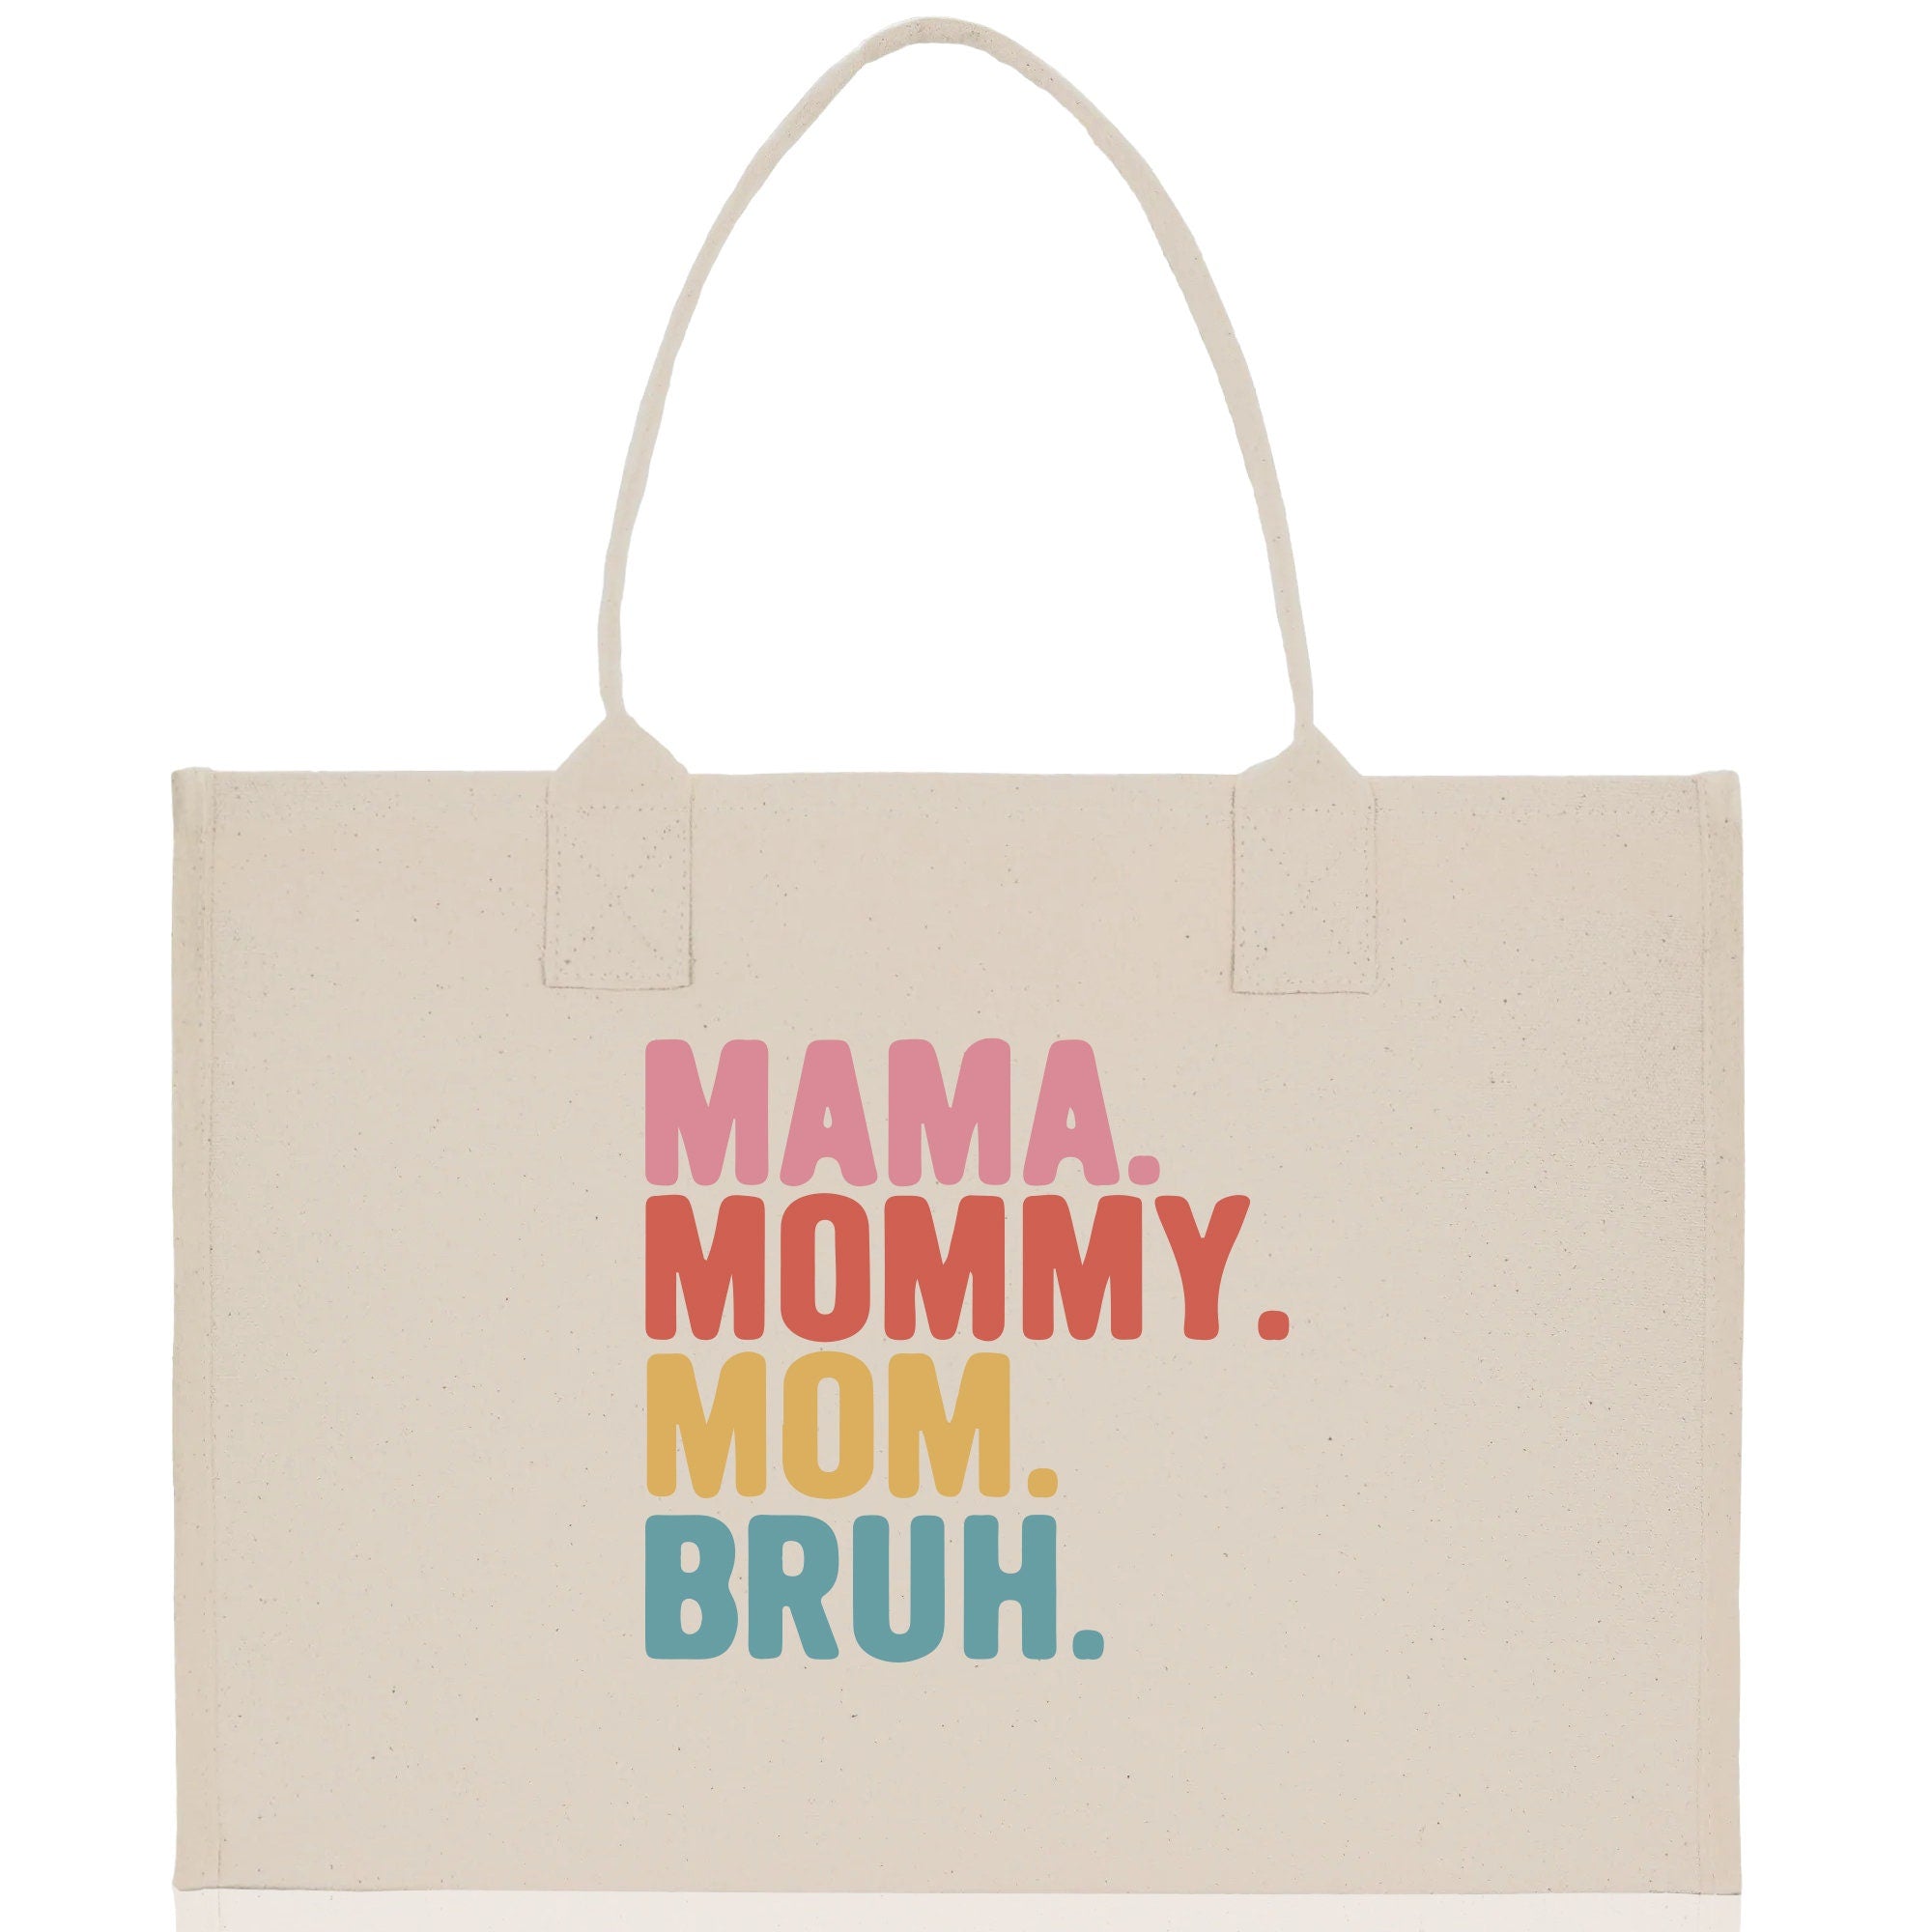 Mama Mommy Mom Bruh Canvas Tote Bag Mama Tote Mom Stuff Bag Mommy Bag Dog Mom Gift Dog Mom Bag Mom Shopping Bag Mom Gift Best Mom Ever Bag